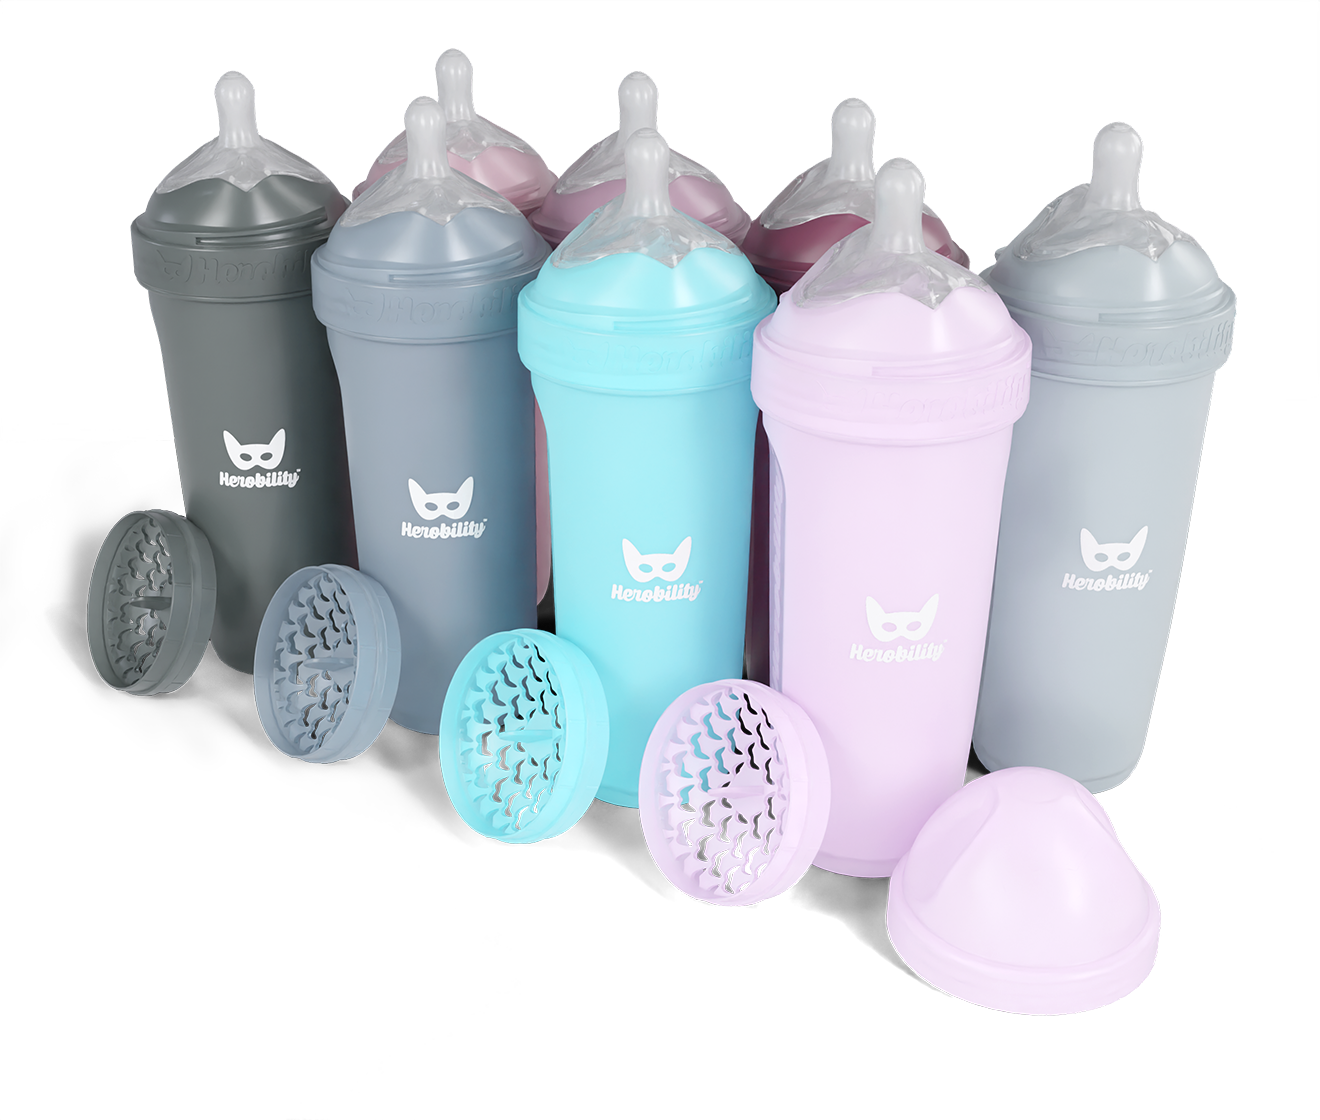 8-pack LT 340ml/12 floz baby bottles with 70% discount